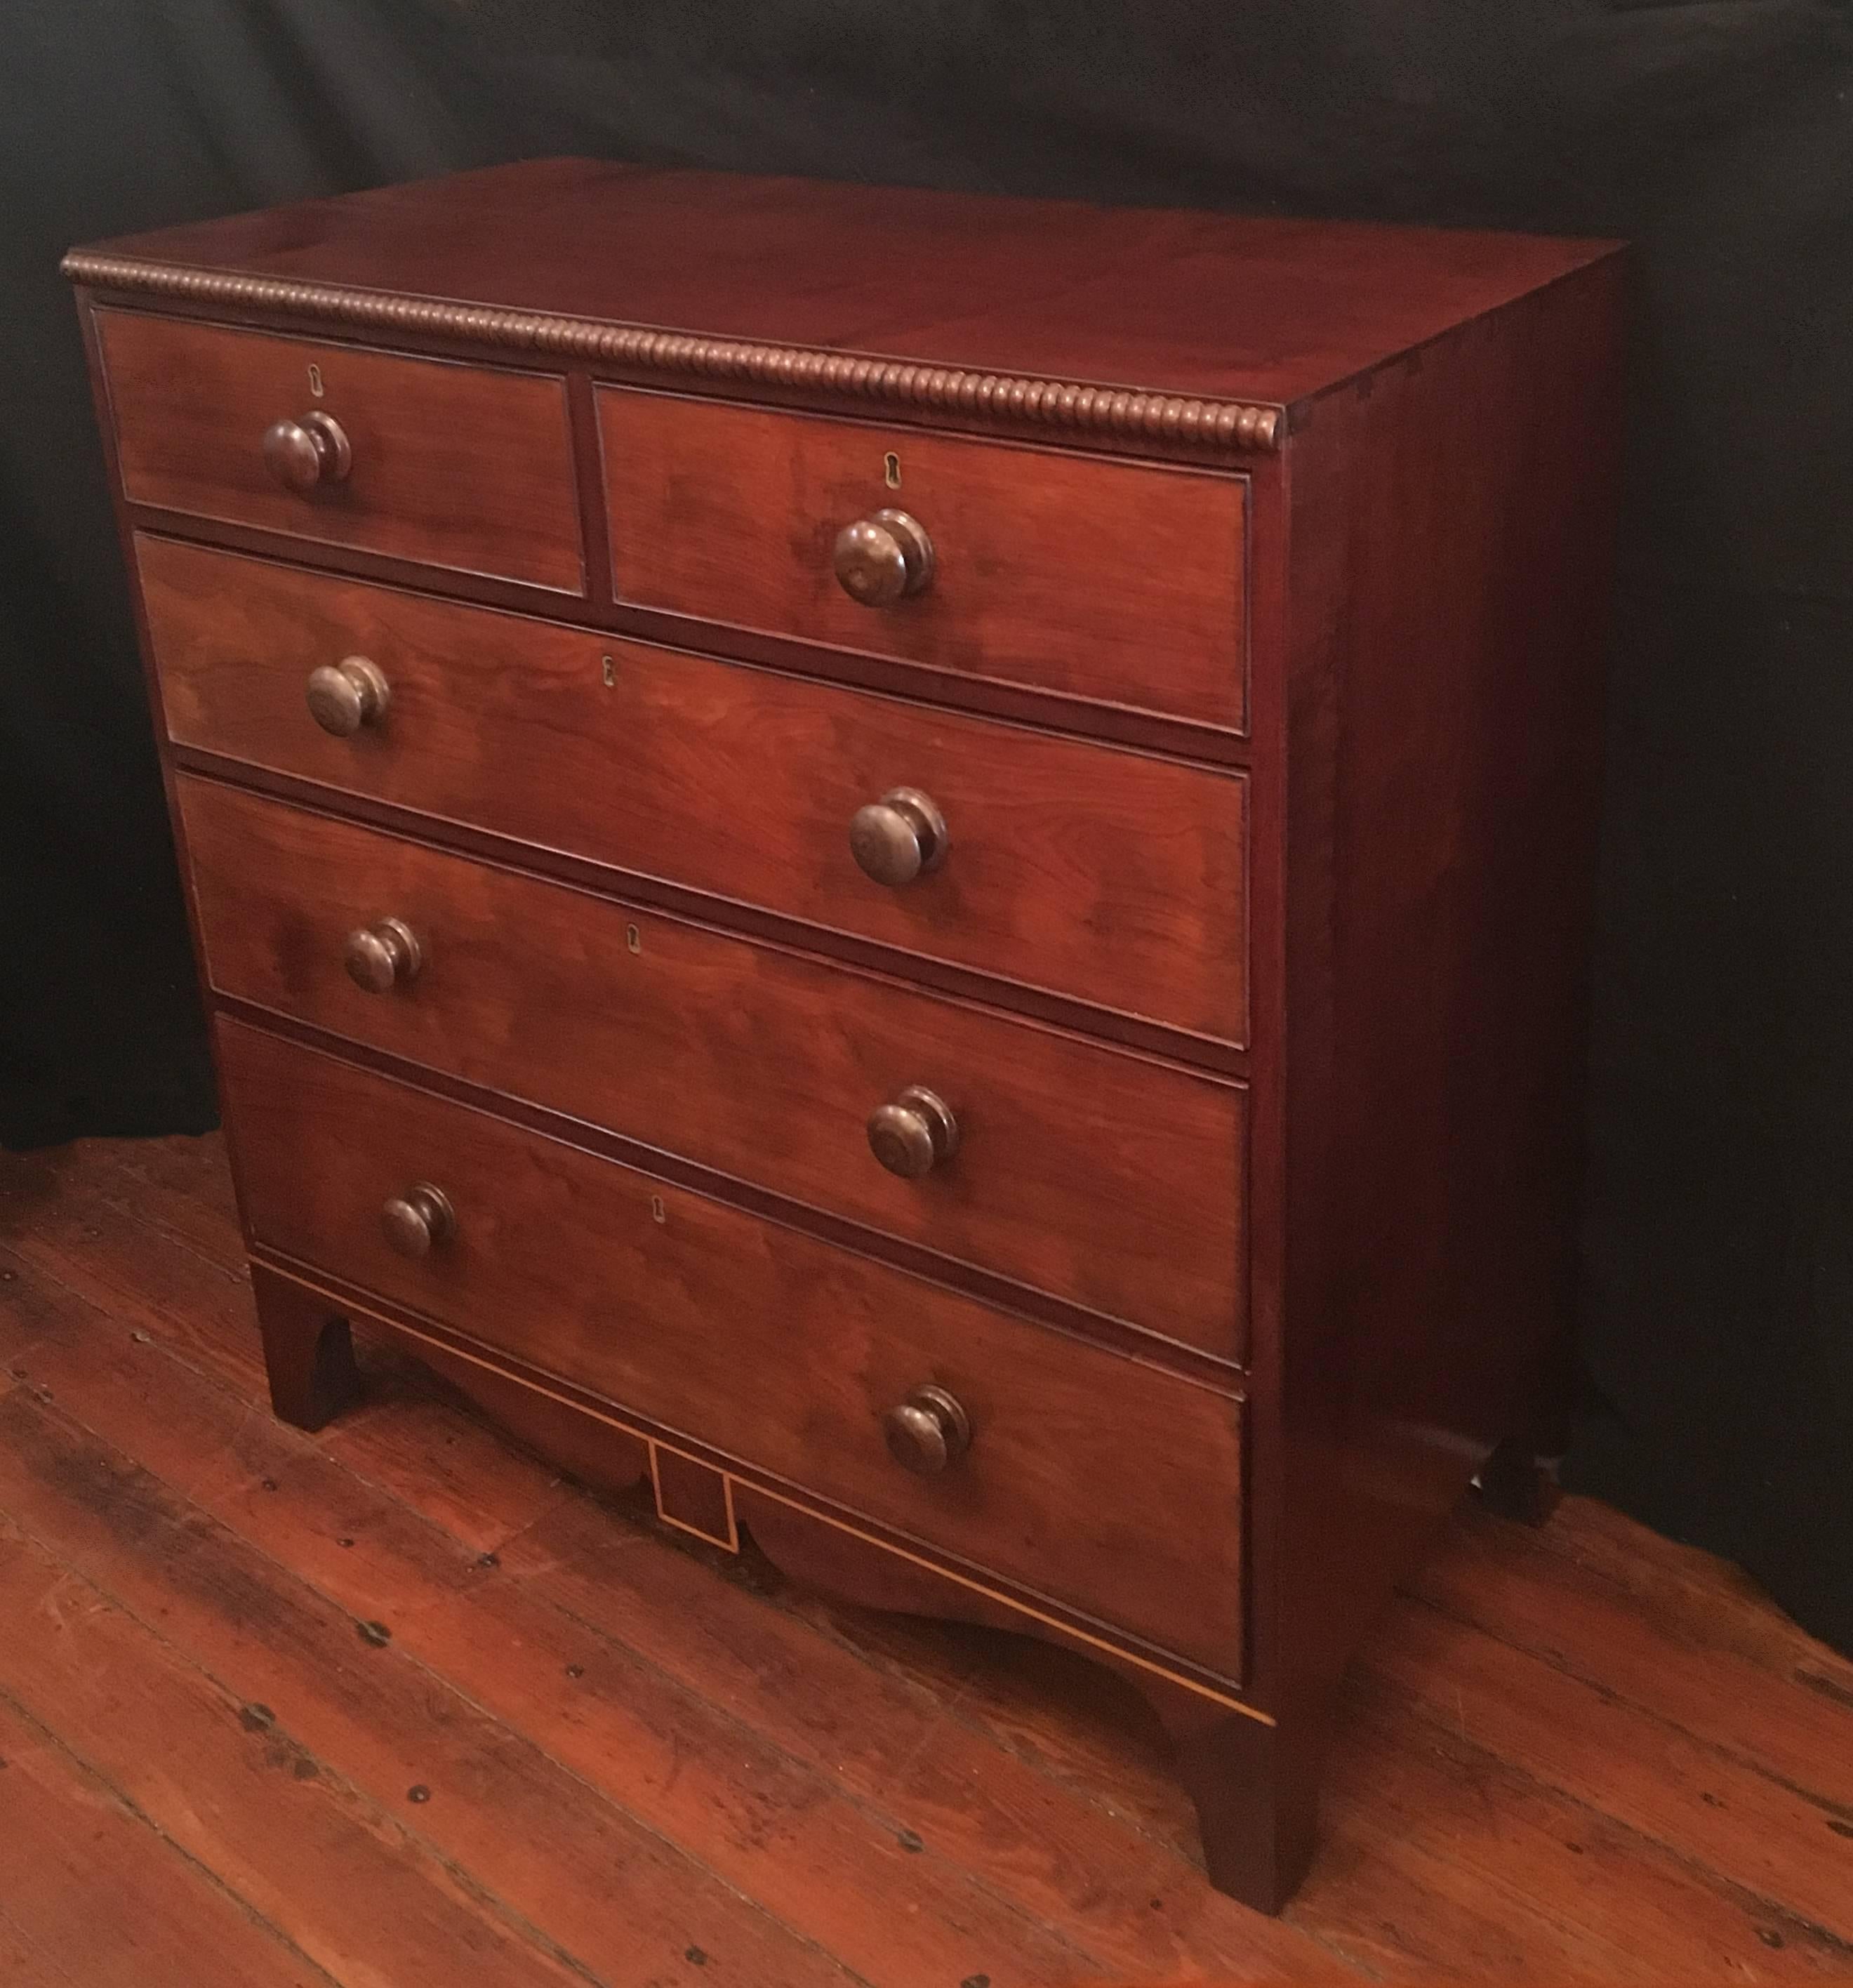 Very rare British Colonial Jamaican chest made out of solid mahogany and cedrela. The chest has satinwood inlay on the bottom rail framing a figured mahogany cartouche with unusual French style bracket feet with Jamaican spur. There is a spool